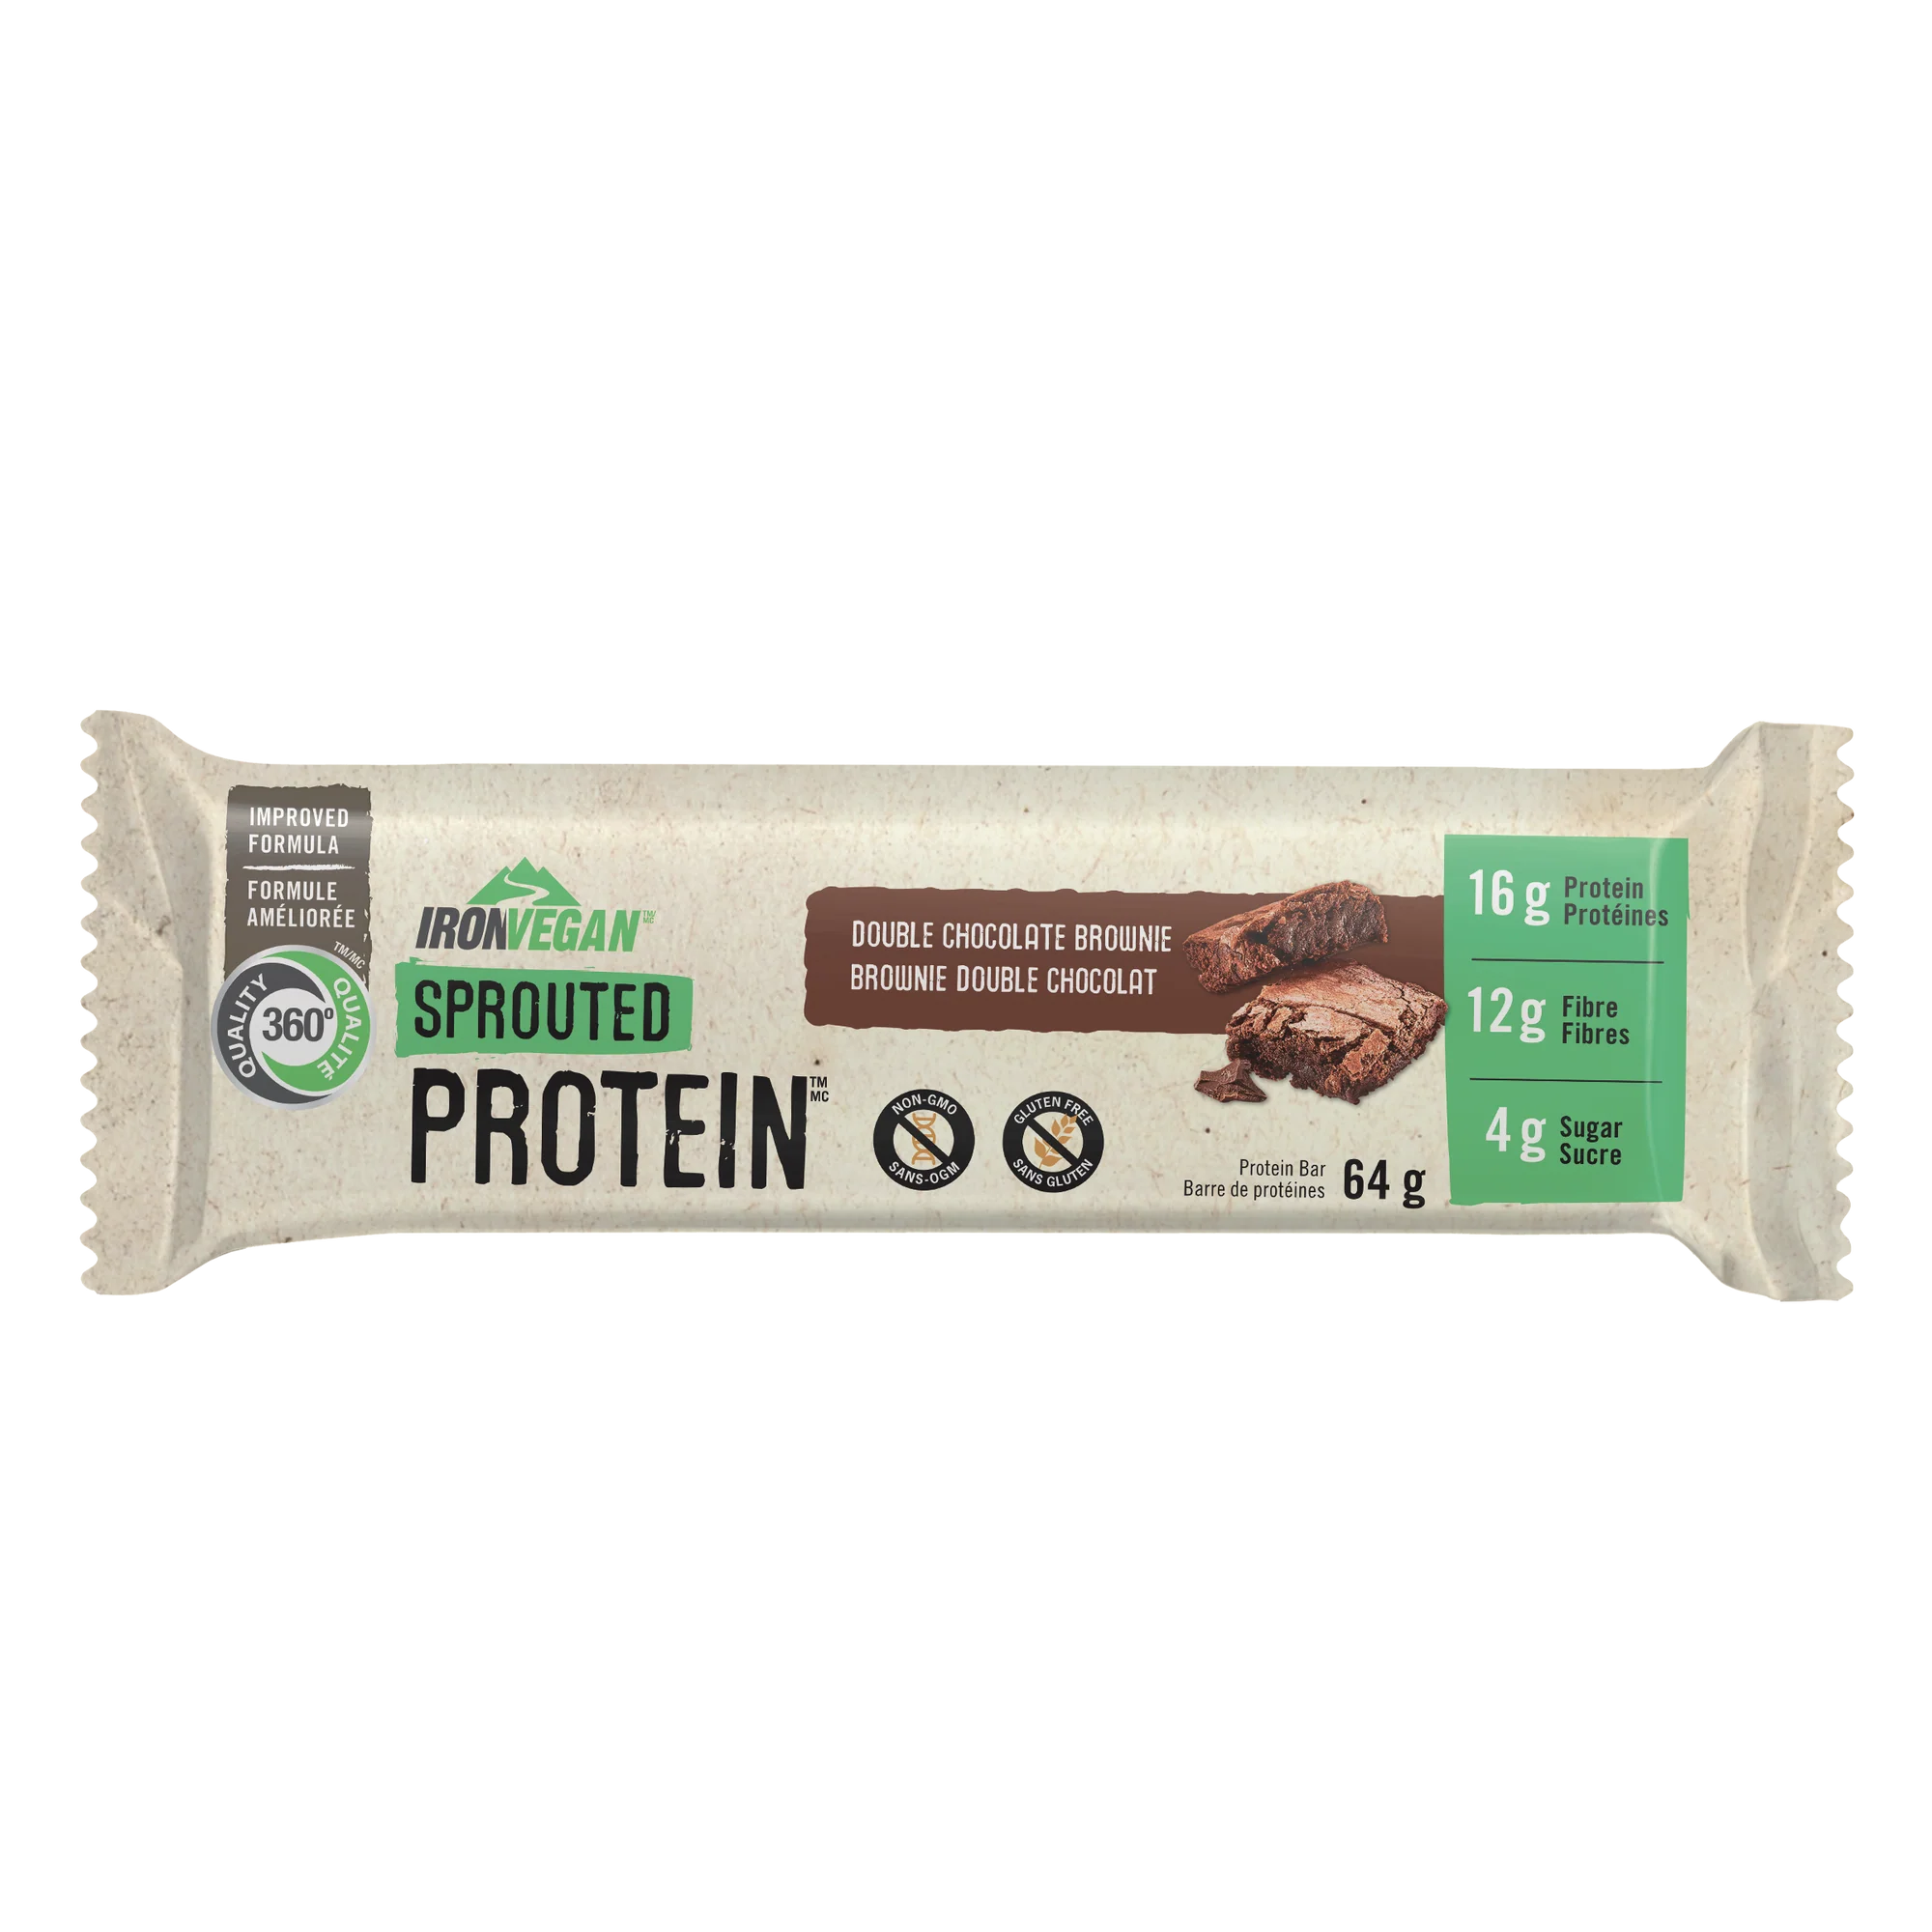 Iron Vegan Sprouted Protein Bar